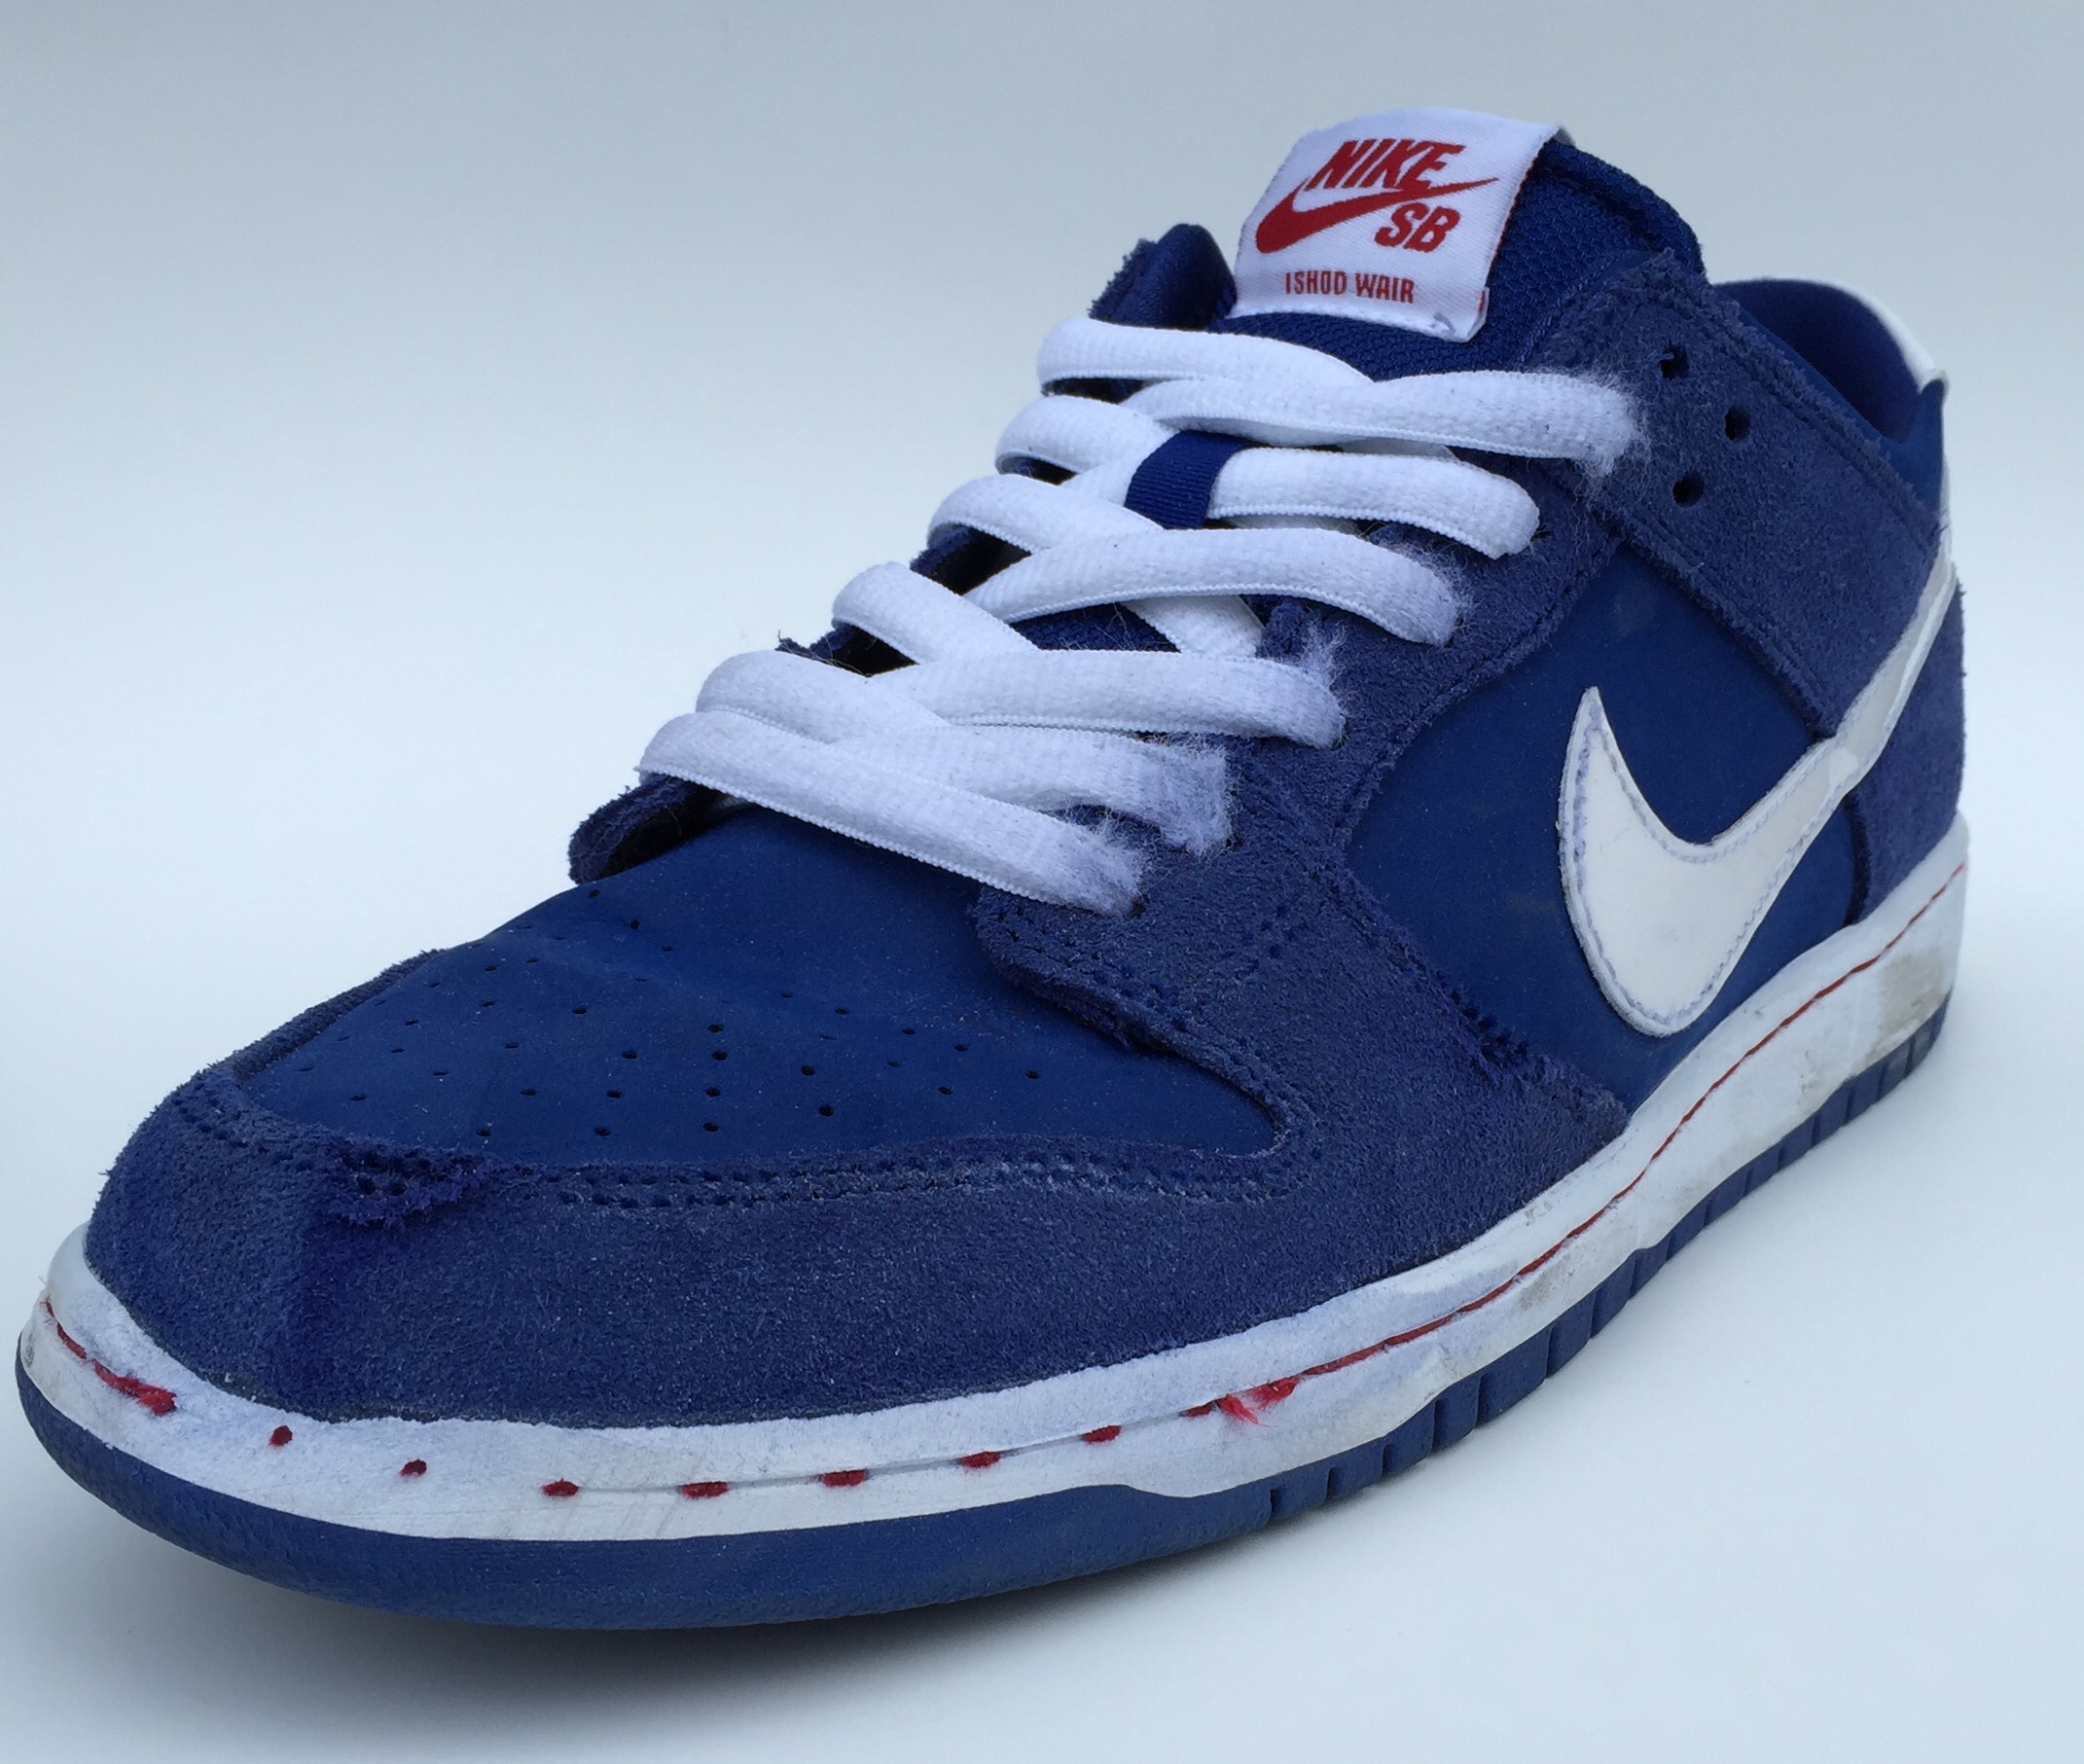 Nike SB Dunk Low Pro IW - Weartested - detailed skate shoe reviews